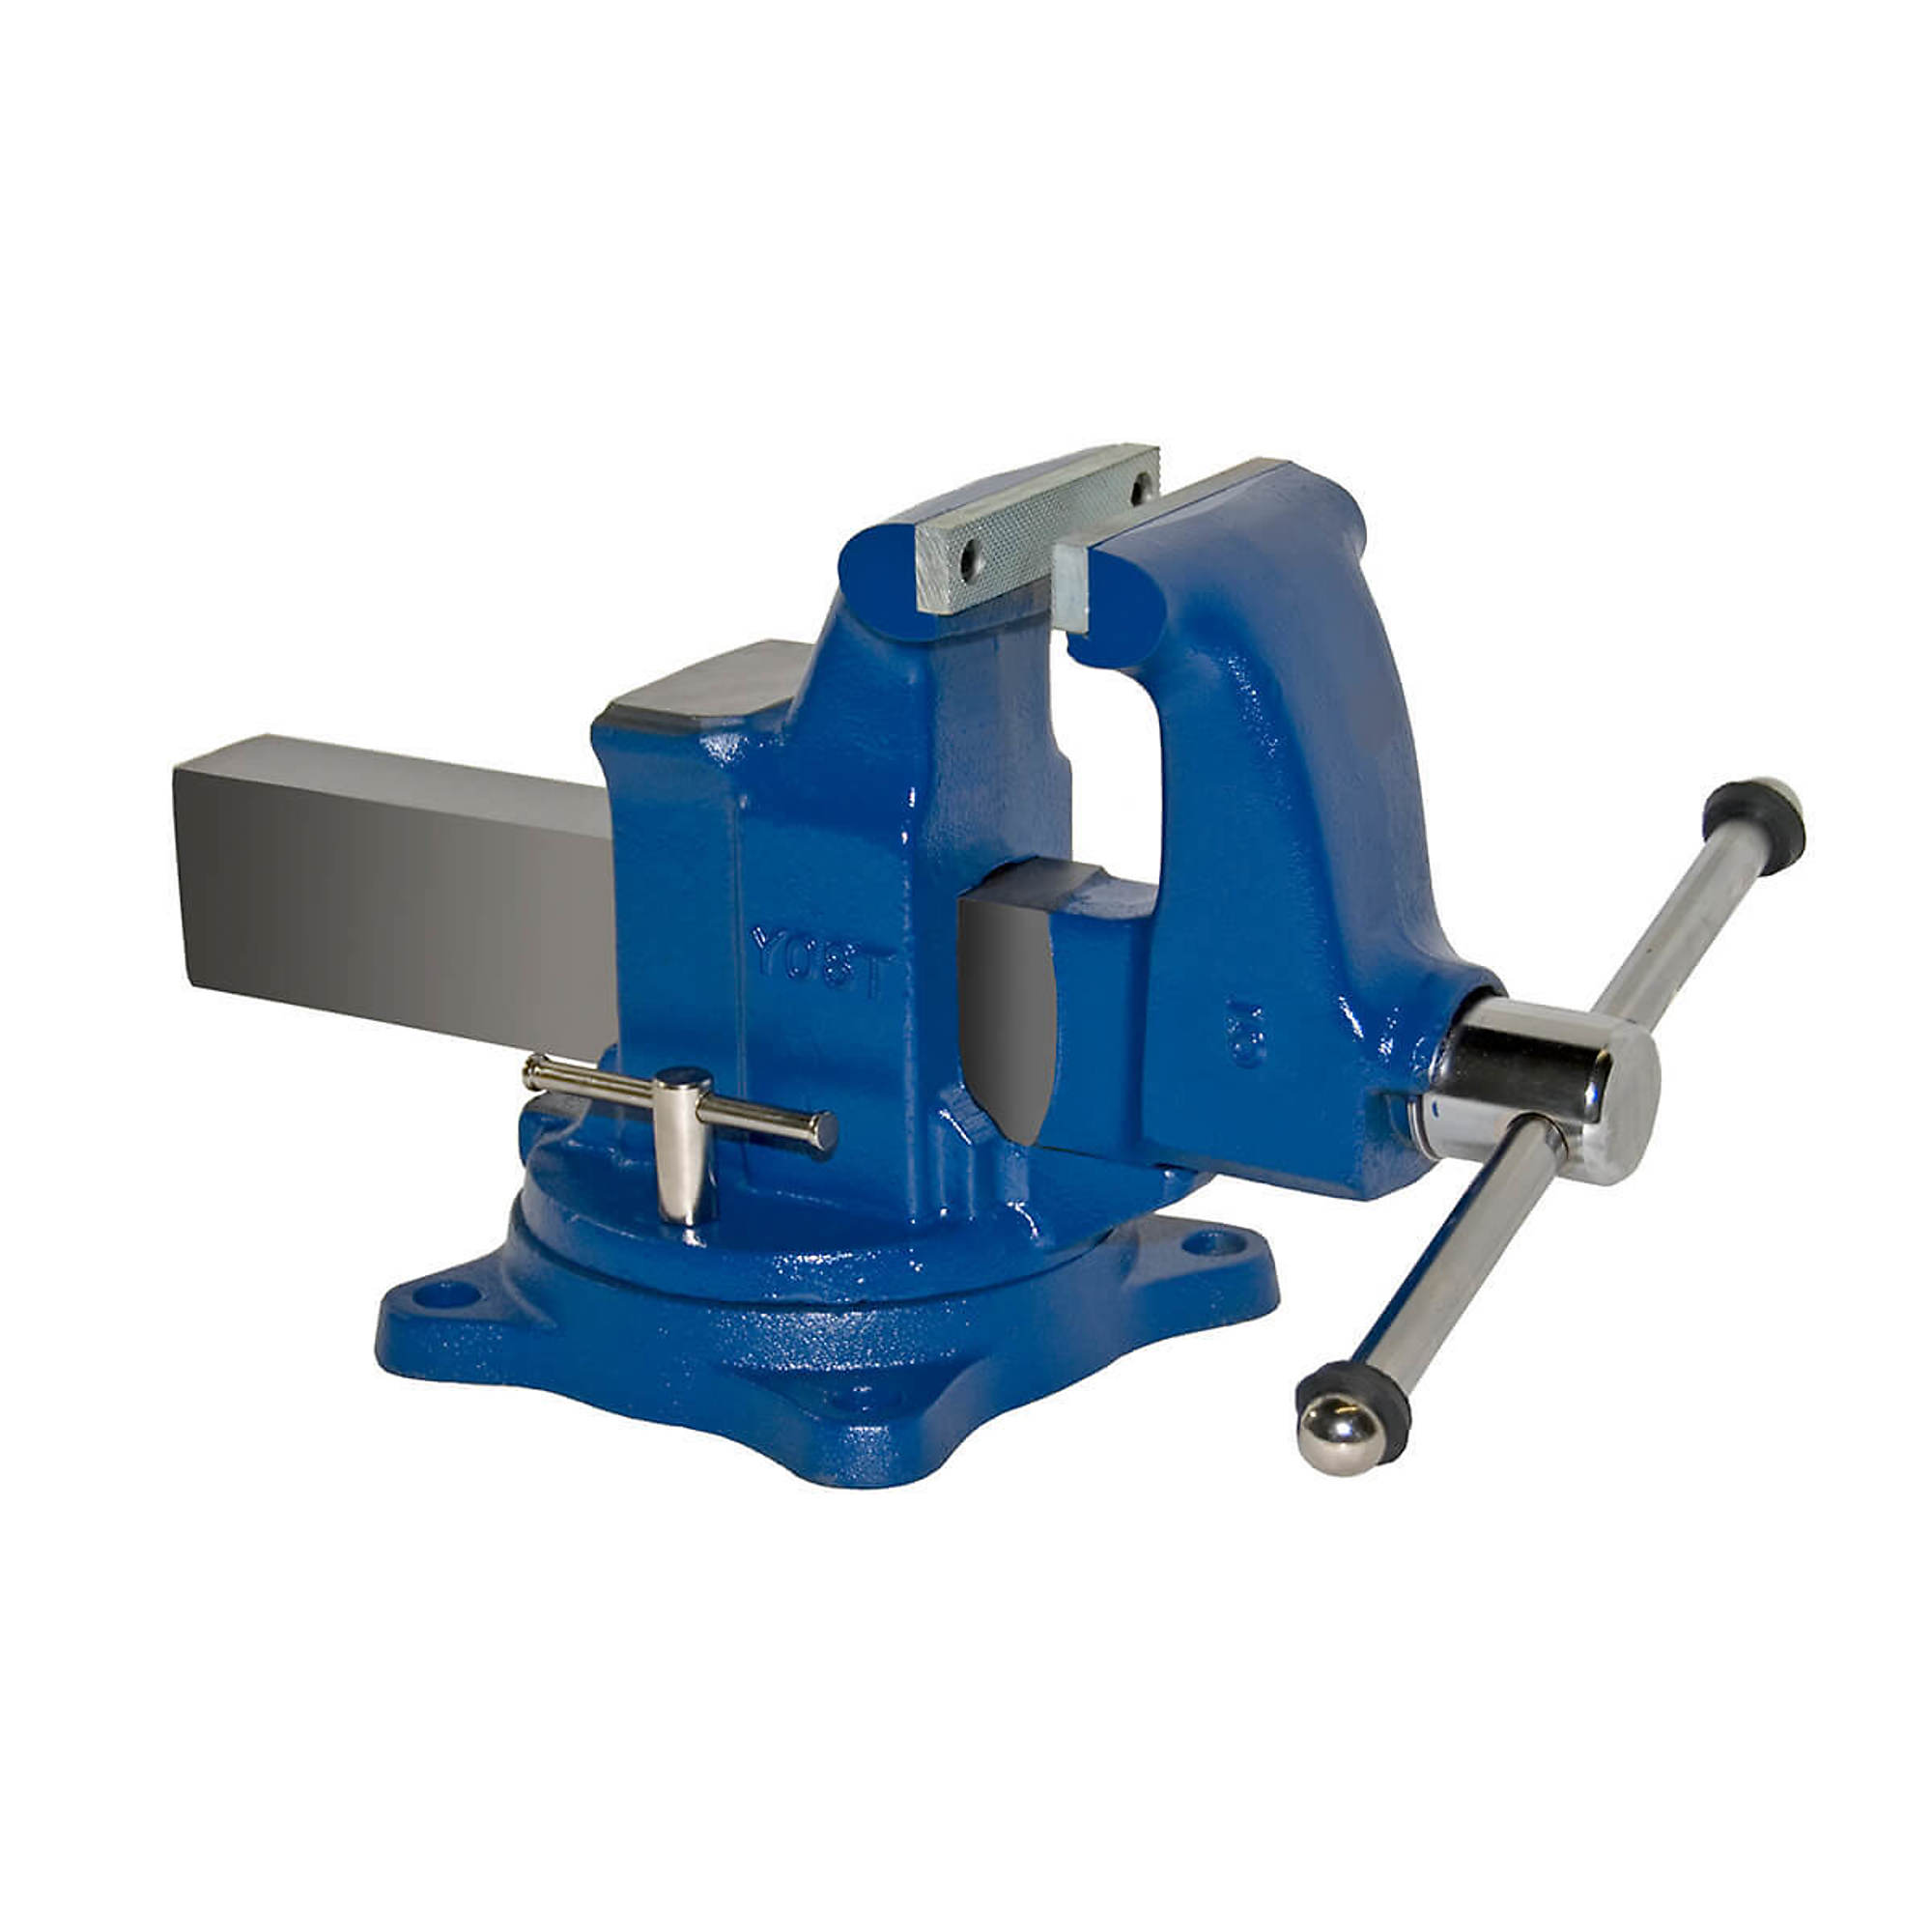 Yost Vises, 5Inch HD Vise Swivel Base, Jaw Width 5 in, Jaw Capacity 8 in, Material Ductile Iron, Model 205